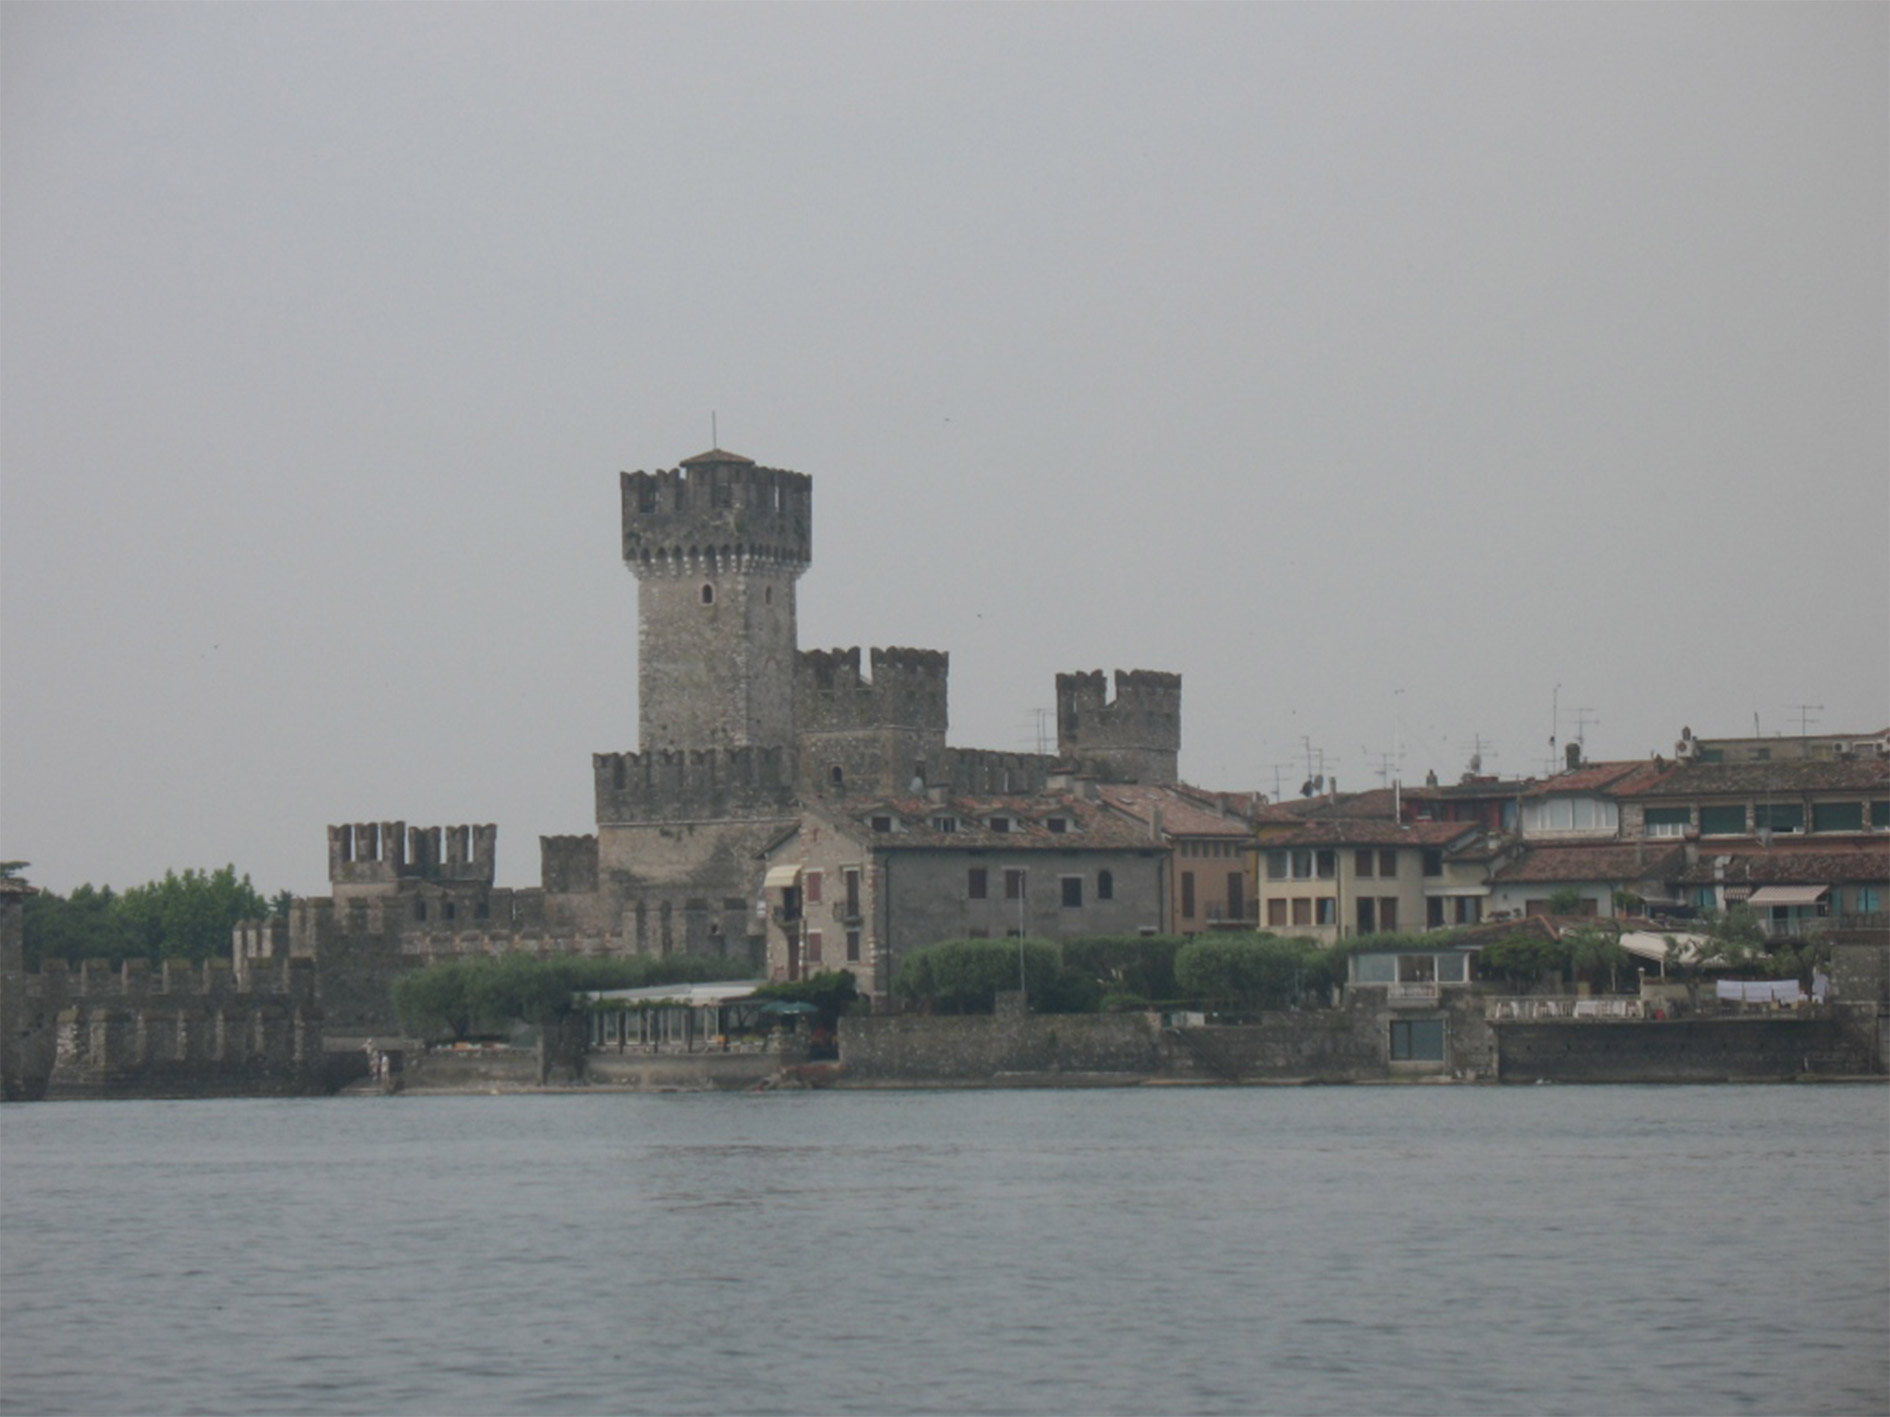 A view on fortification from a boat